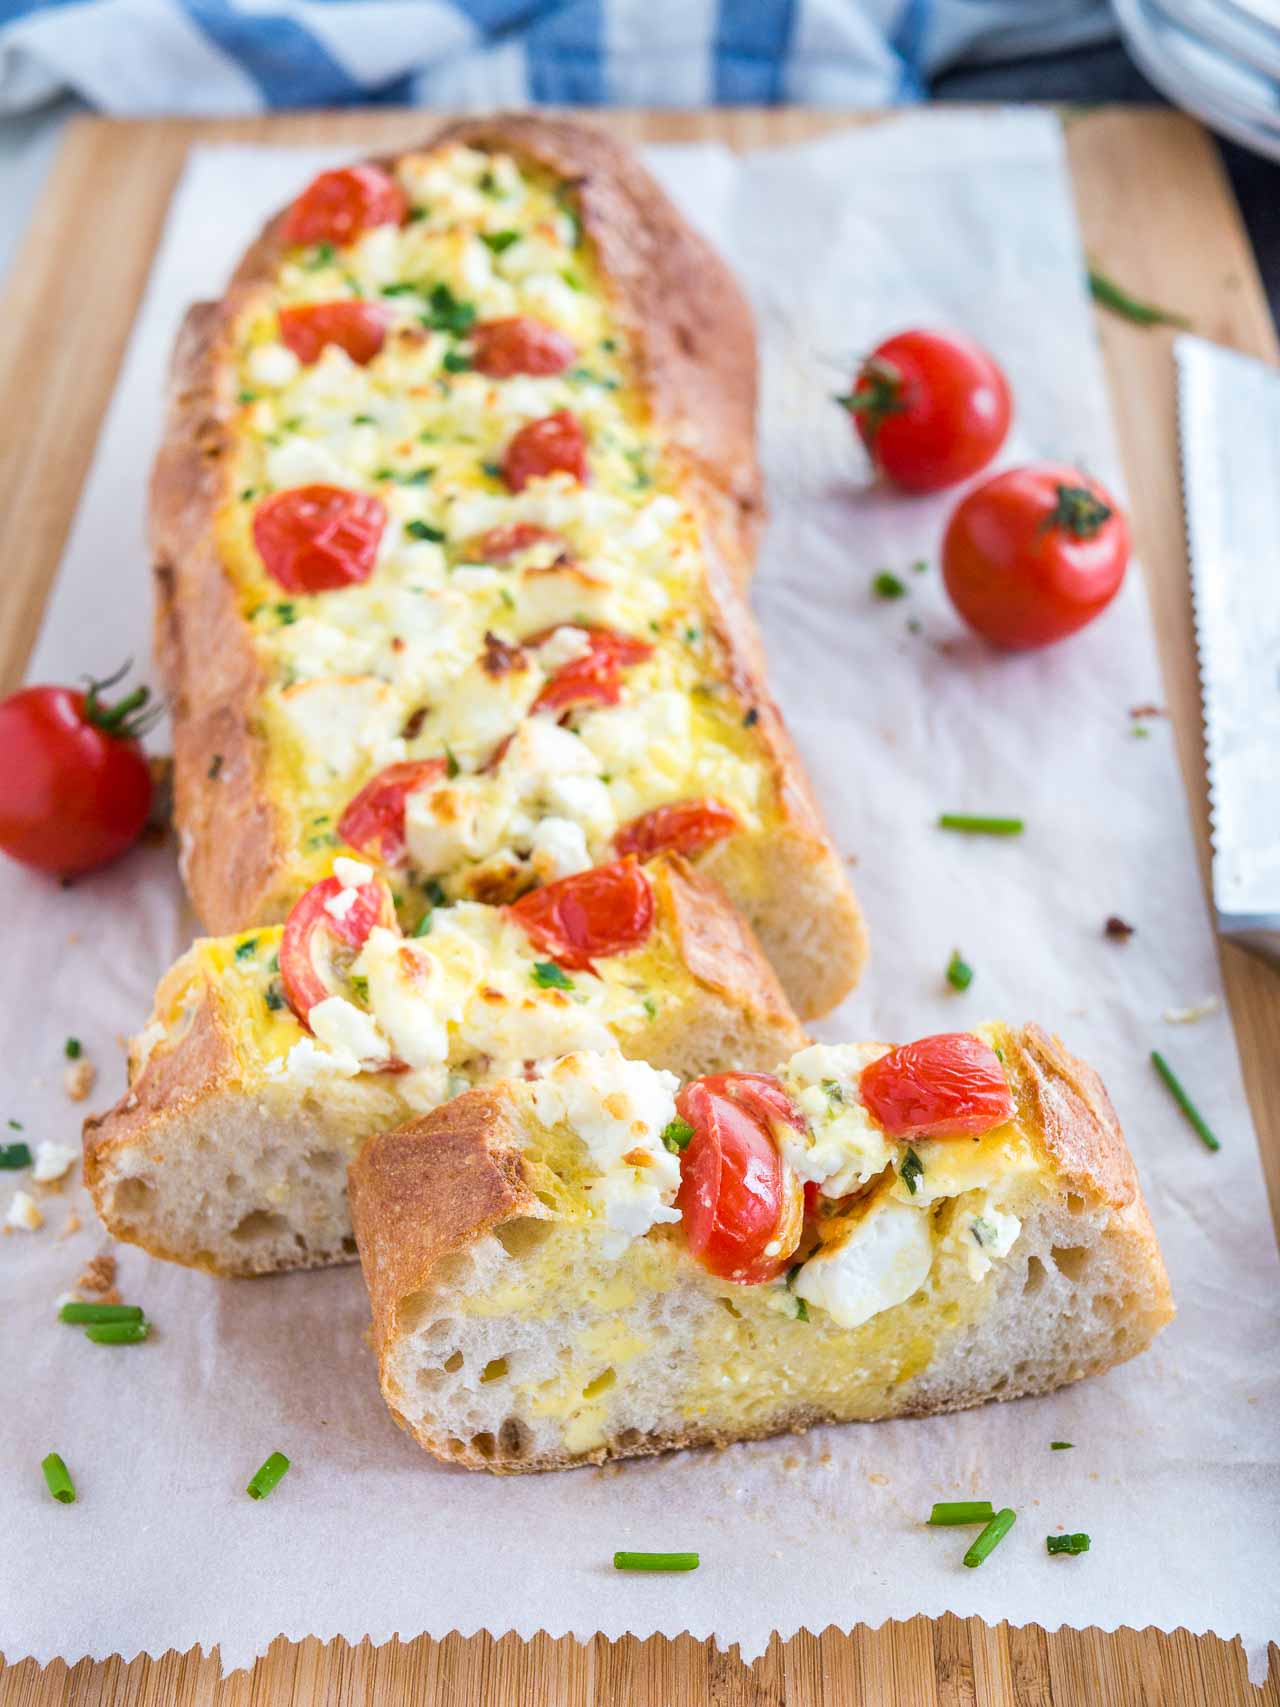 Tomato feta stuffed french bread garnished with tomatoes and chives on a bamboo cutting board lined with parchment paper. Two slices have been cut off and are sitting in front of it and there\'s a bread knife lying next to it.